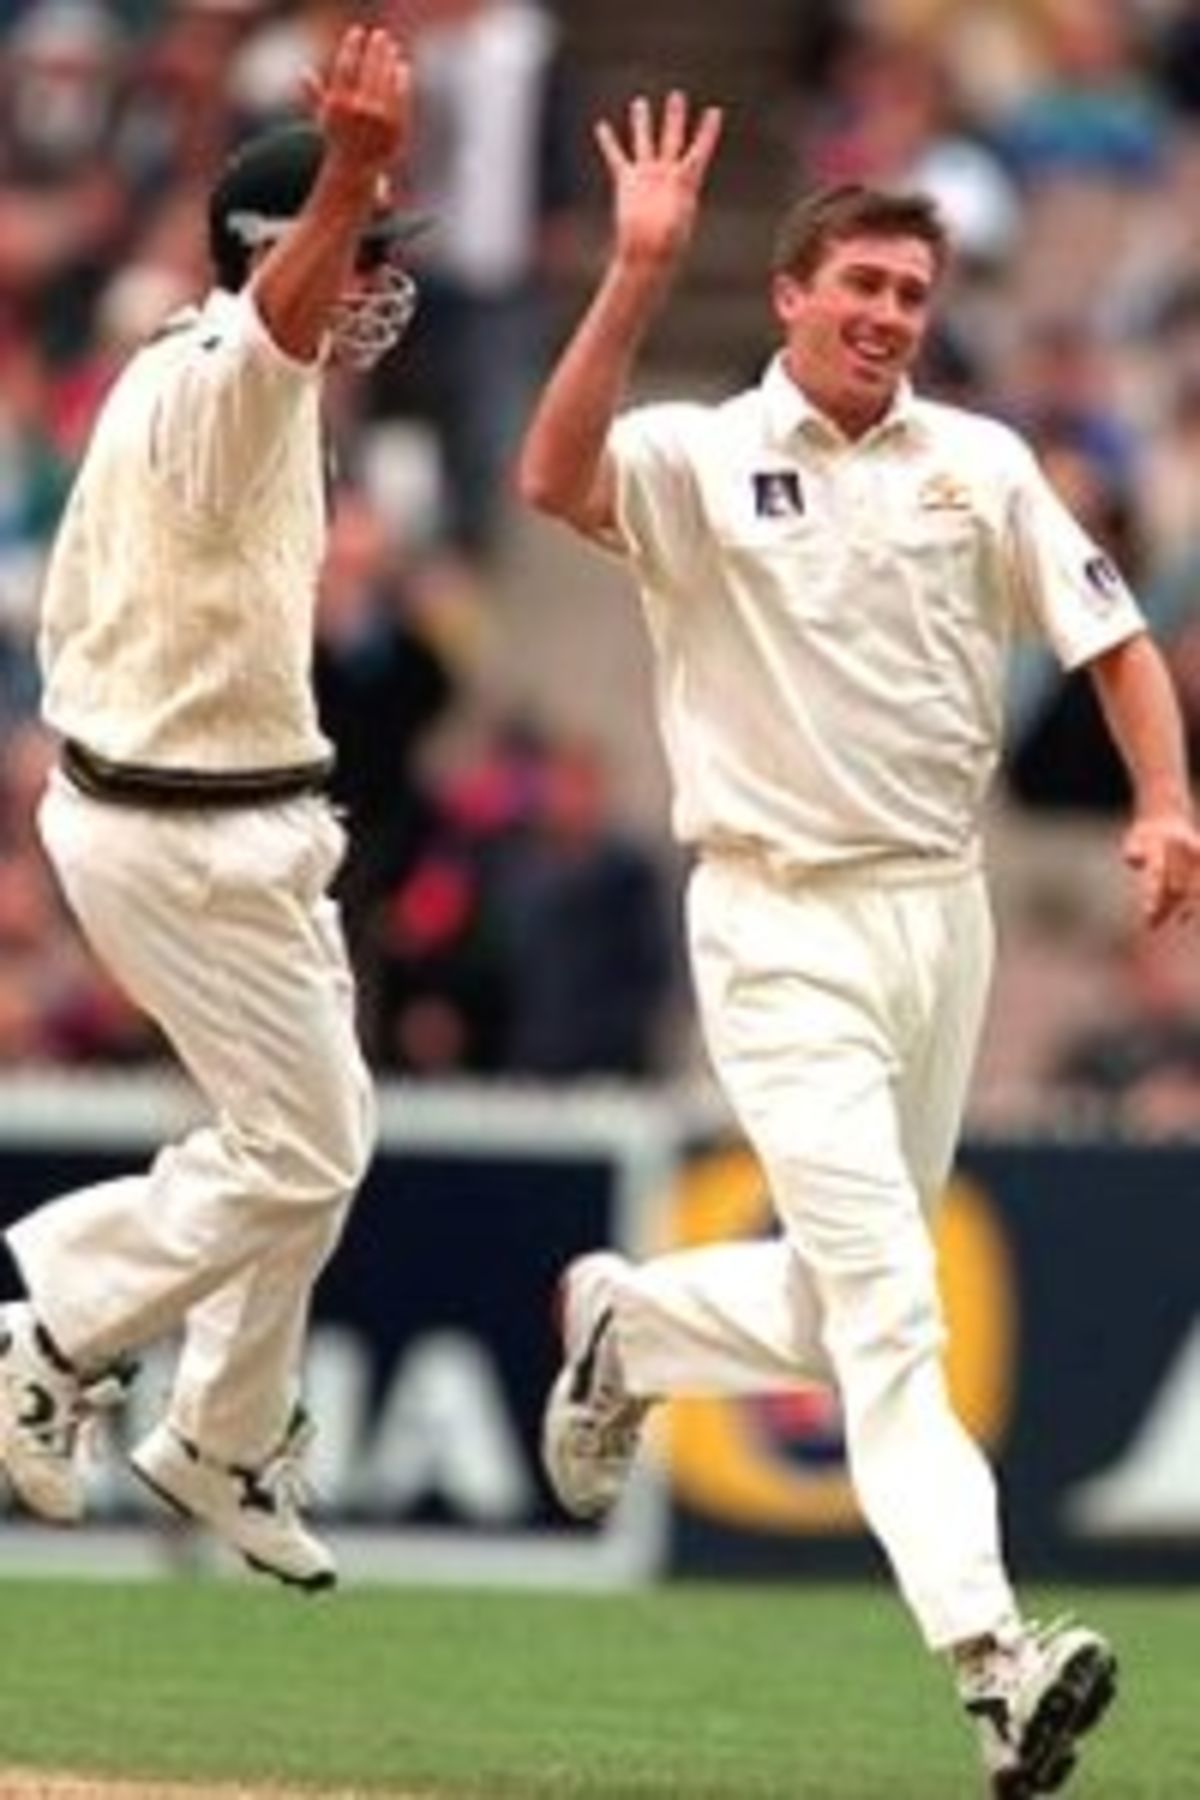 28 Dec 1999: Justin Langer of Australia congratulates team mate Glenn McGrath after taking the wicket of VVS Laxman of India, on day three of the second test match between Australia and India, played at the Melbourne Cricket Ground, Melbourne, Australia. Laxman was dismissed for 5 runs, caught Mark Waugh, bowled Glenn McGrath.